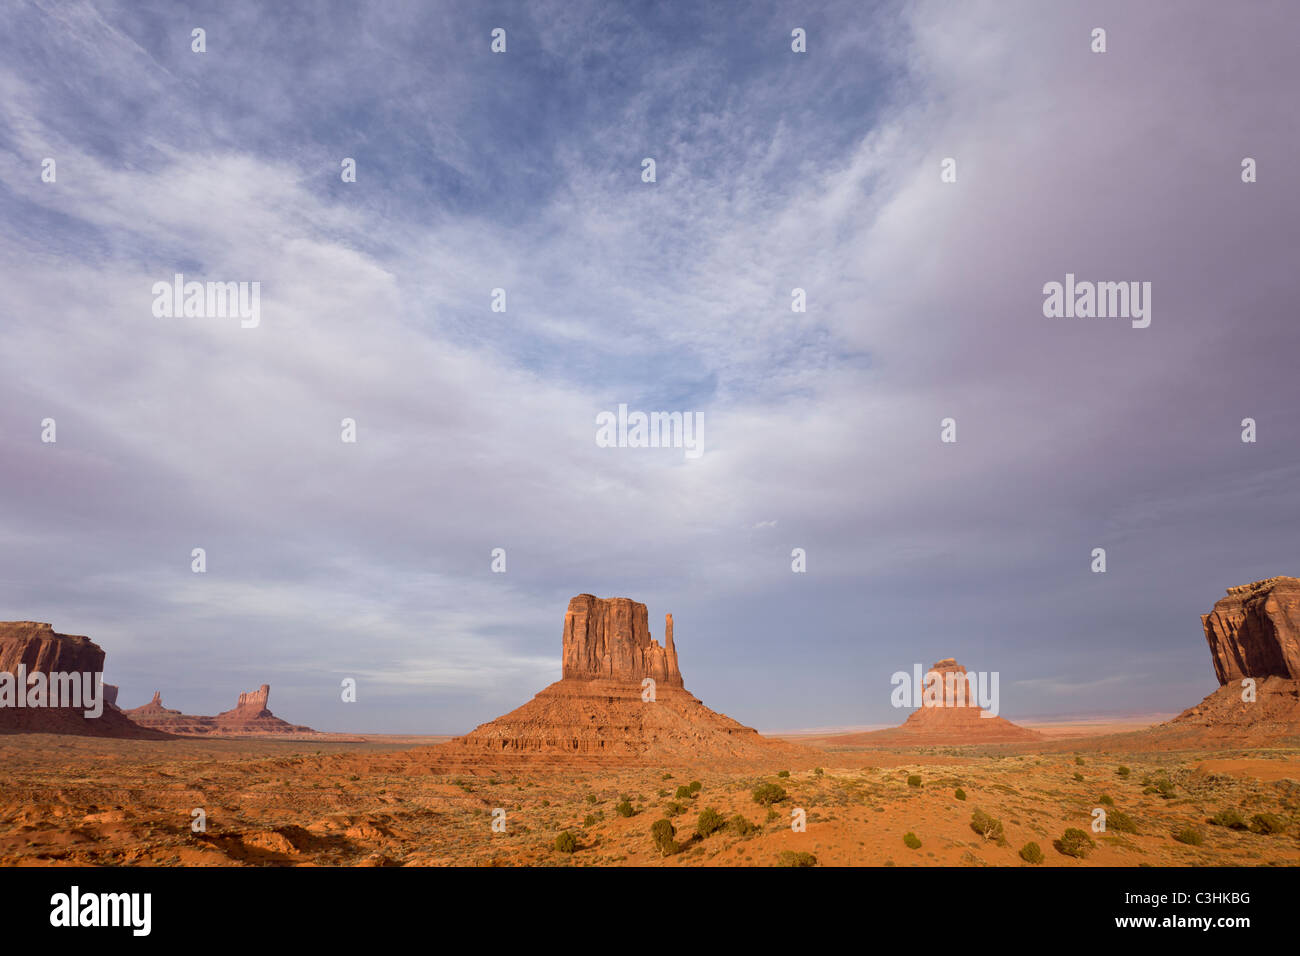 Monument Valley Navajo Tribal Park which spans the border between Arizona and Utah in the southwestern USA. Stock Photo